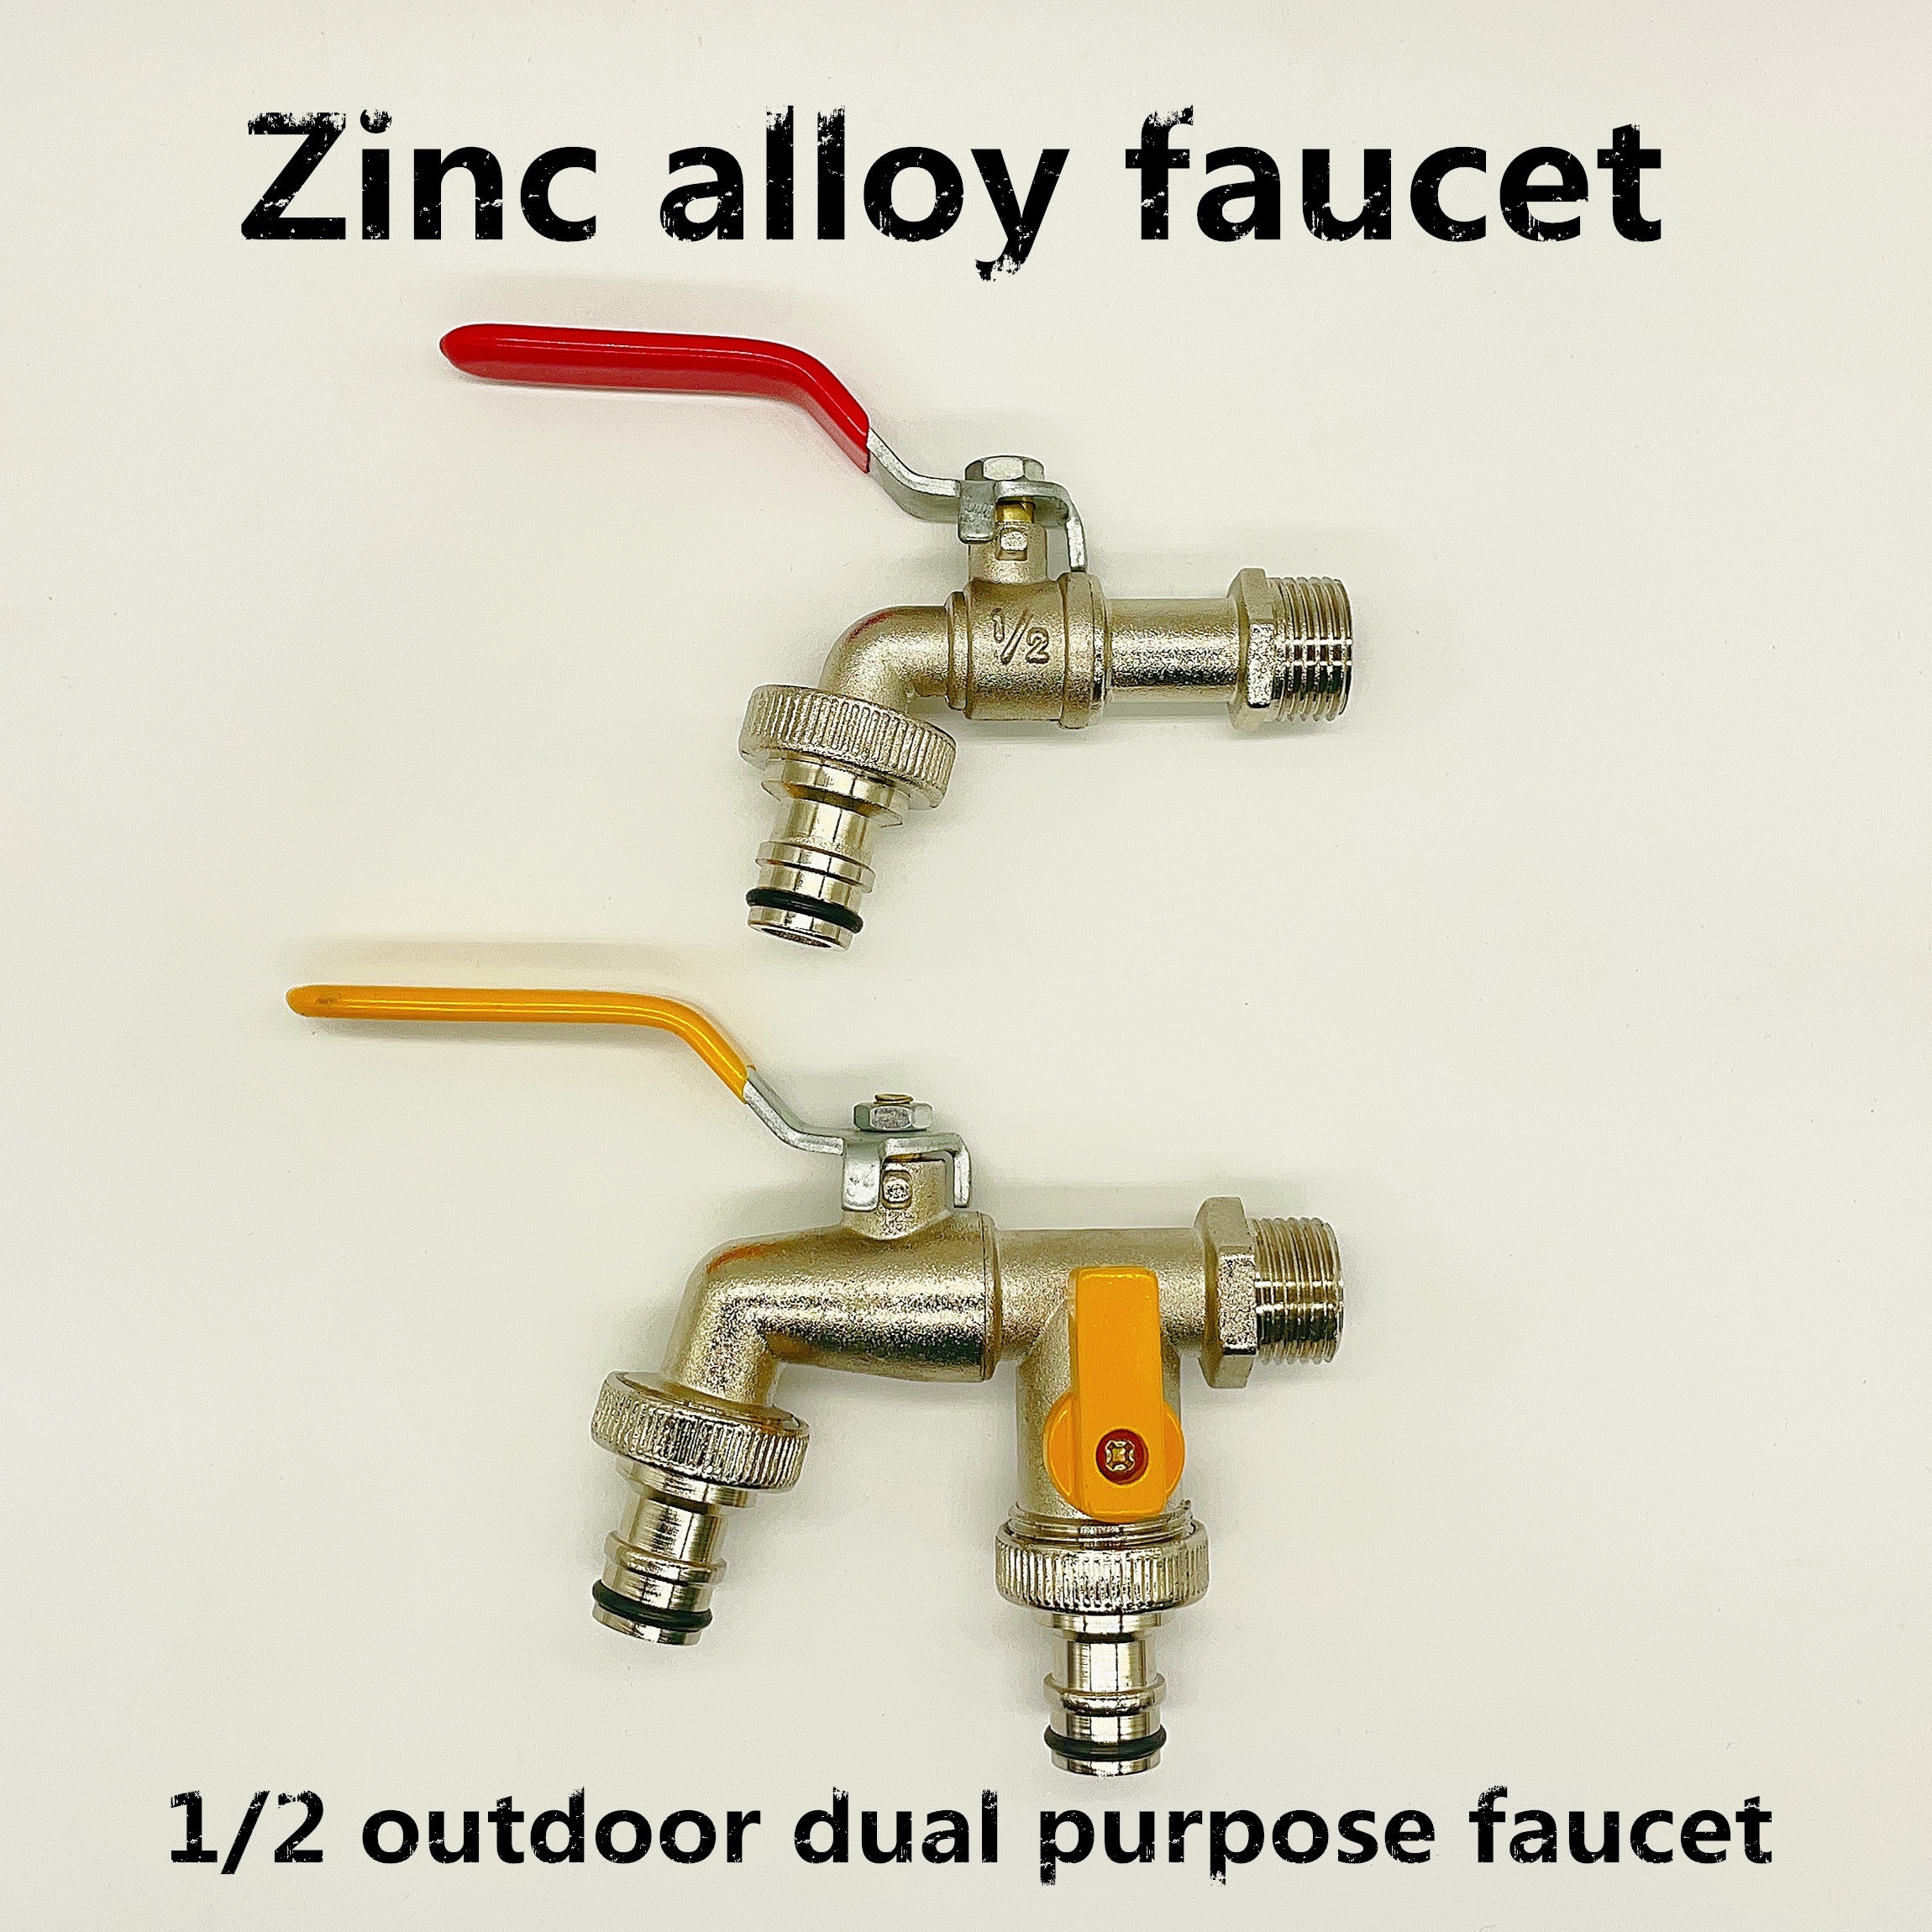 

1pc Dual-outlet Outdoor Faucet - Anti-freeze, Zinc Alloy With Polished Finish For Garden & Yard Connections